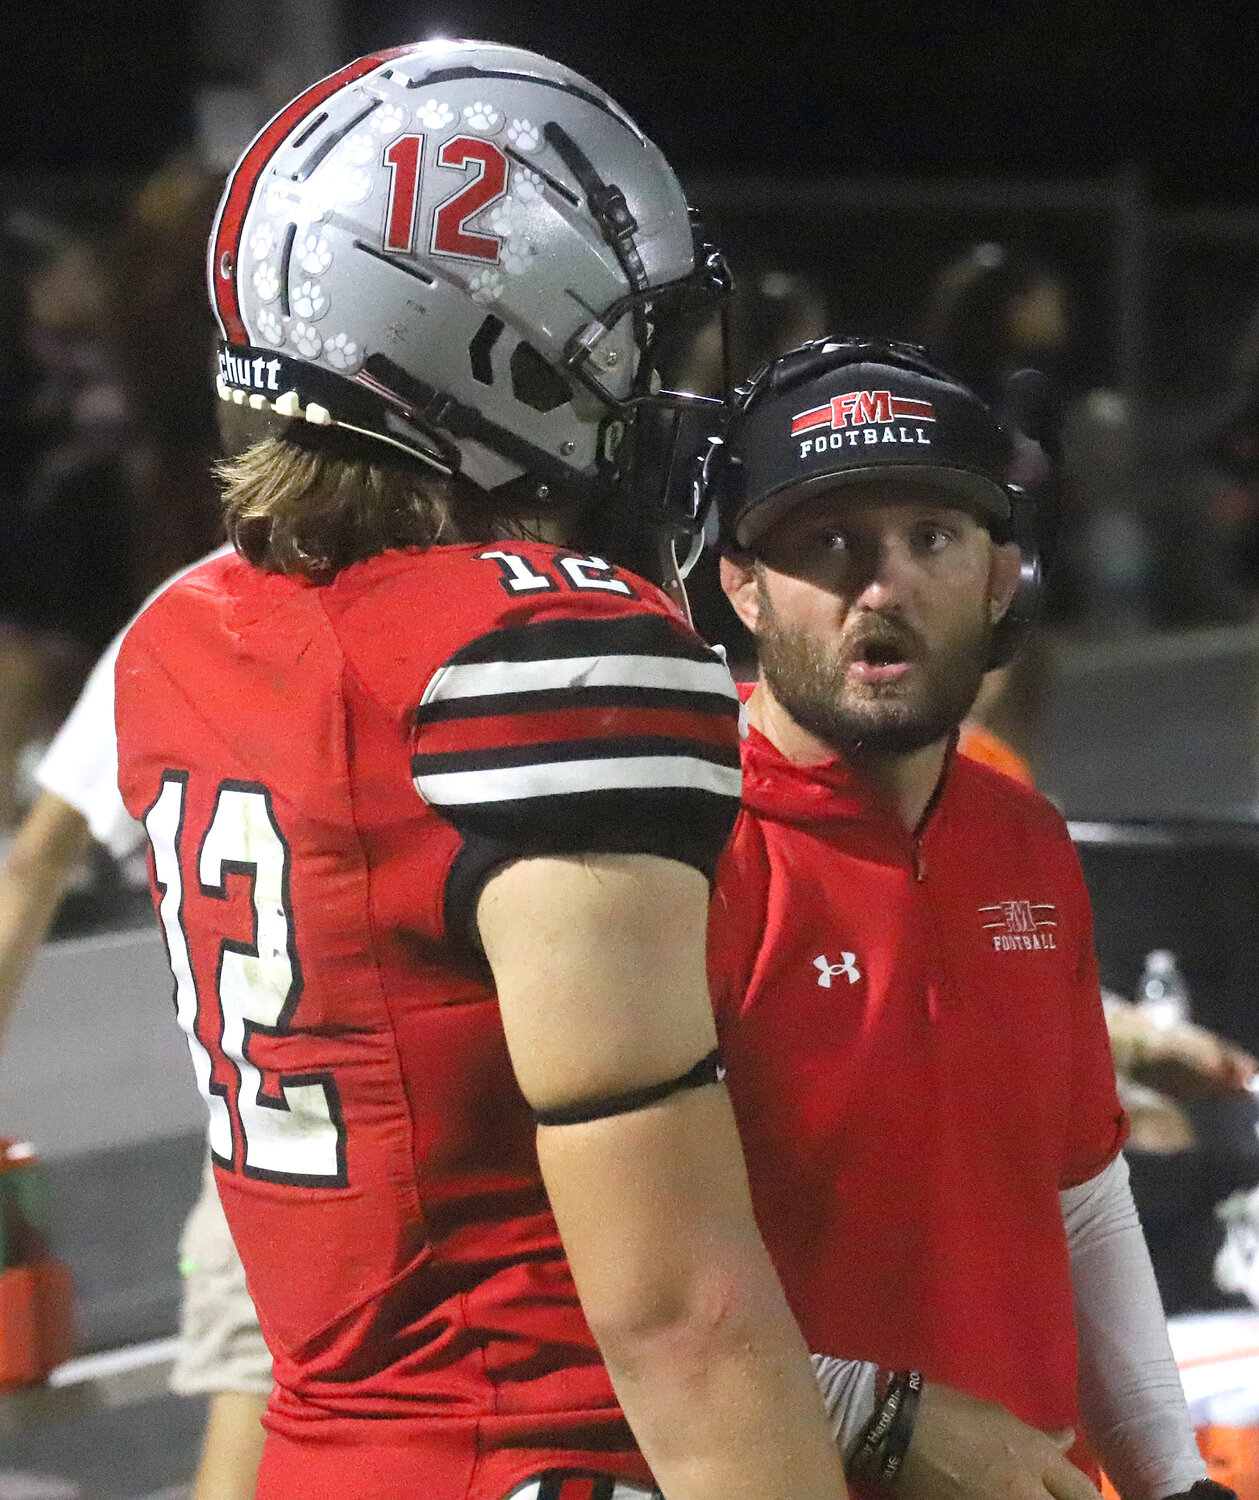 Fort Madison Head Coach Derek Doherty takes a moment with quarterback Marcus Guzman on the sideline Friday night in the Hounds' win over the Chiefs.